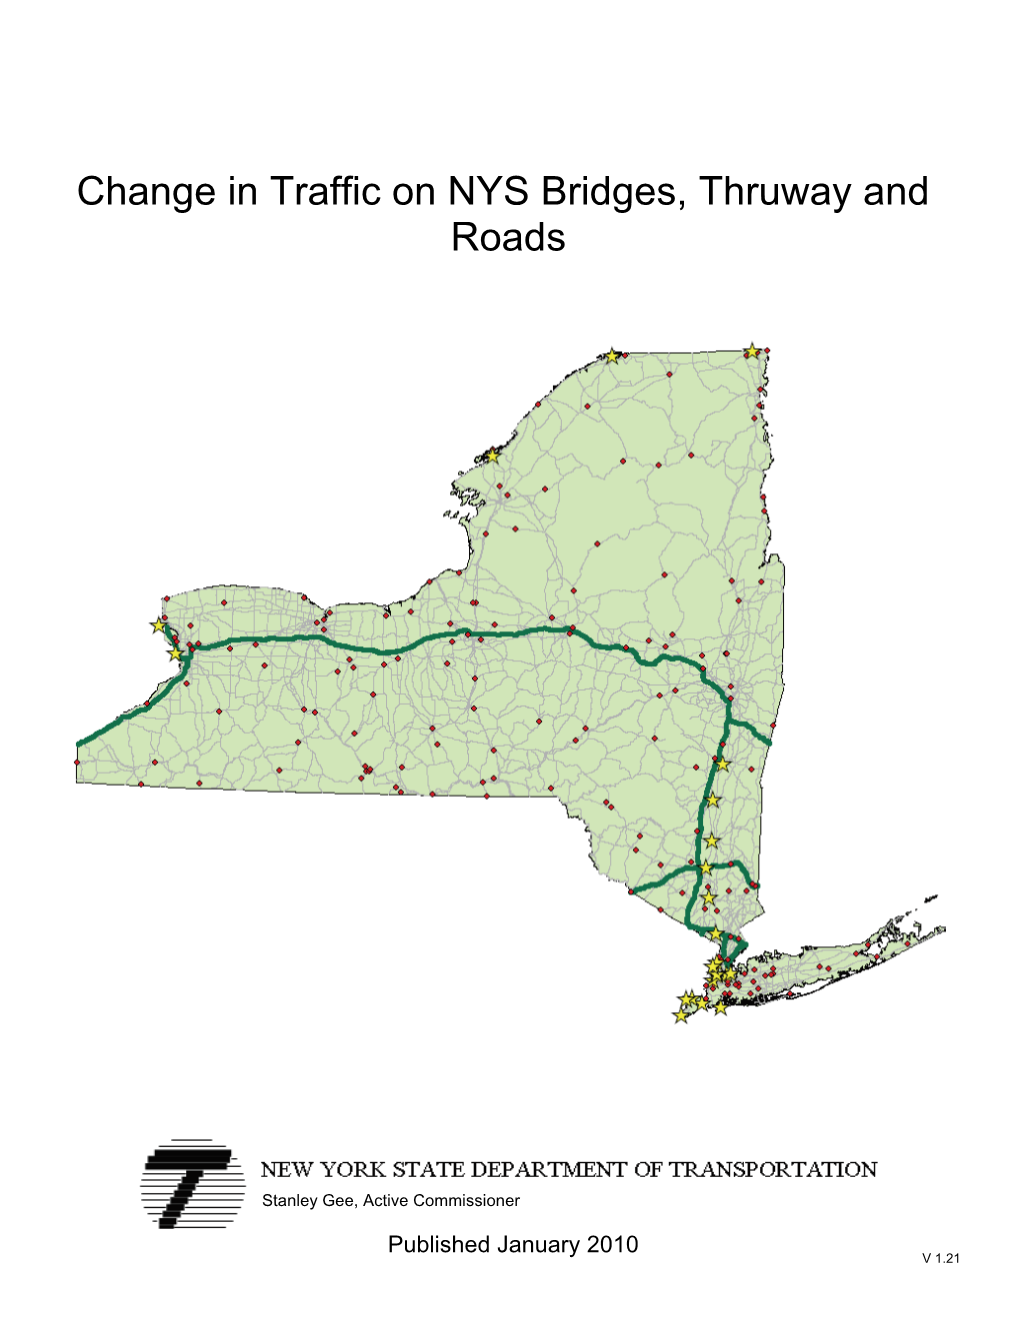 Change in Traffic on NYS Bridges, Thruway and Roads